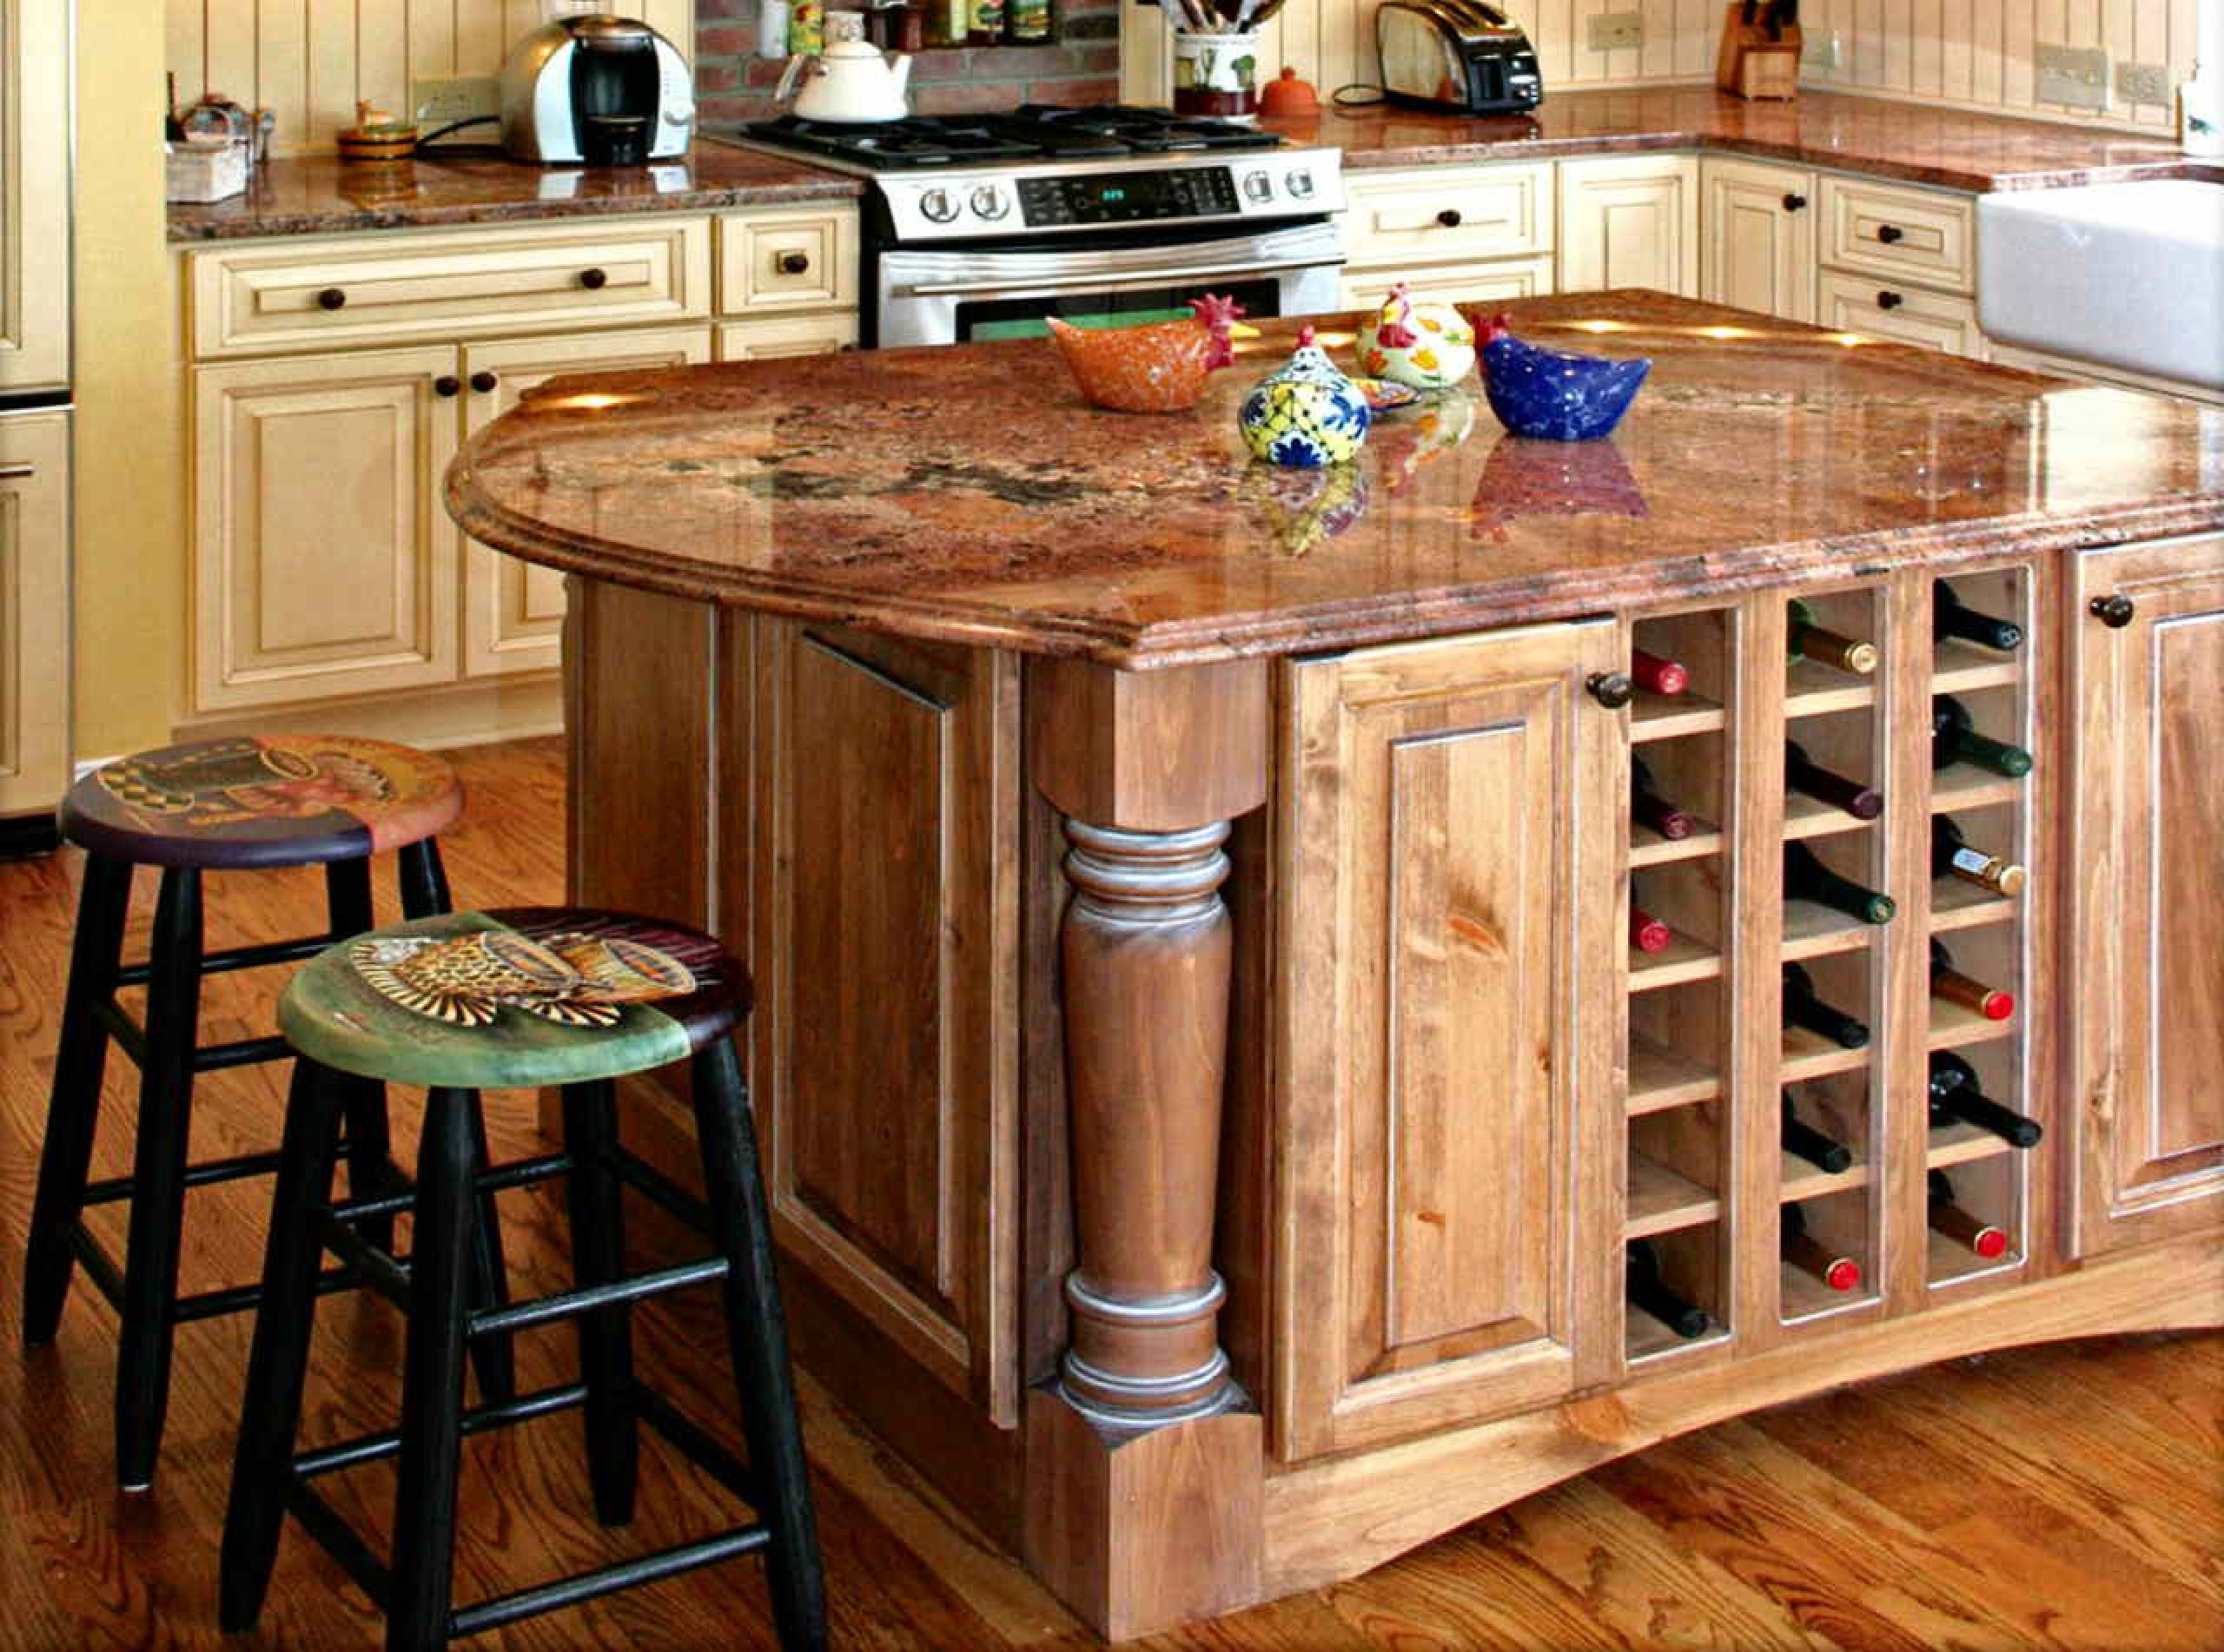 Touchstone Cabinets